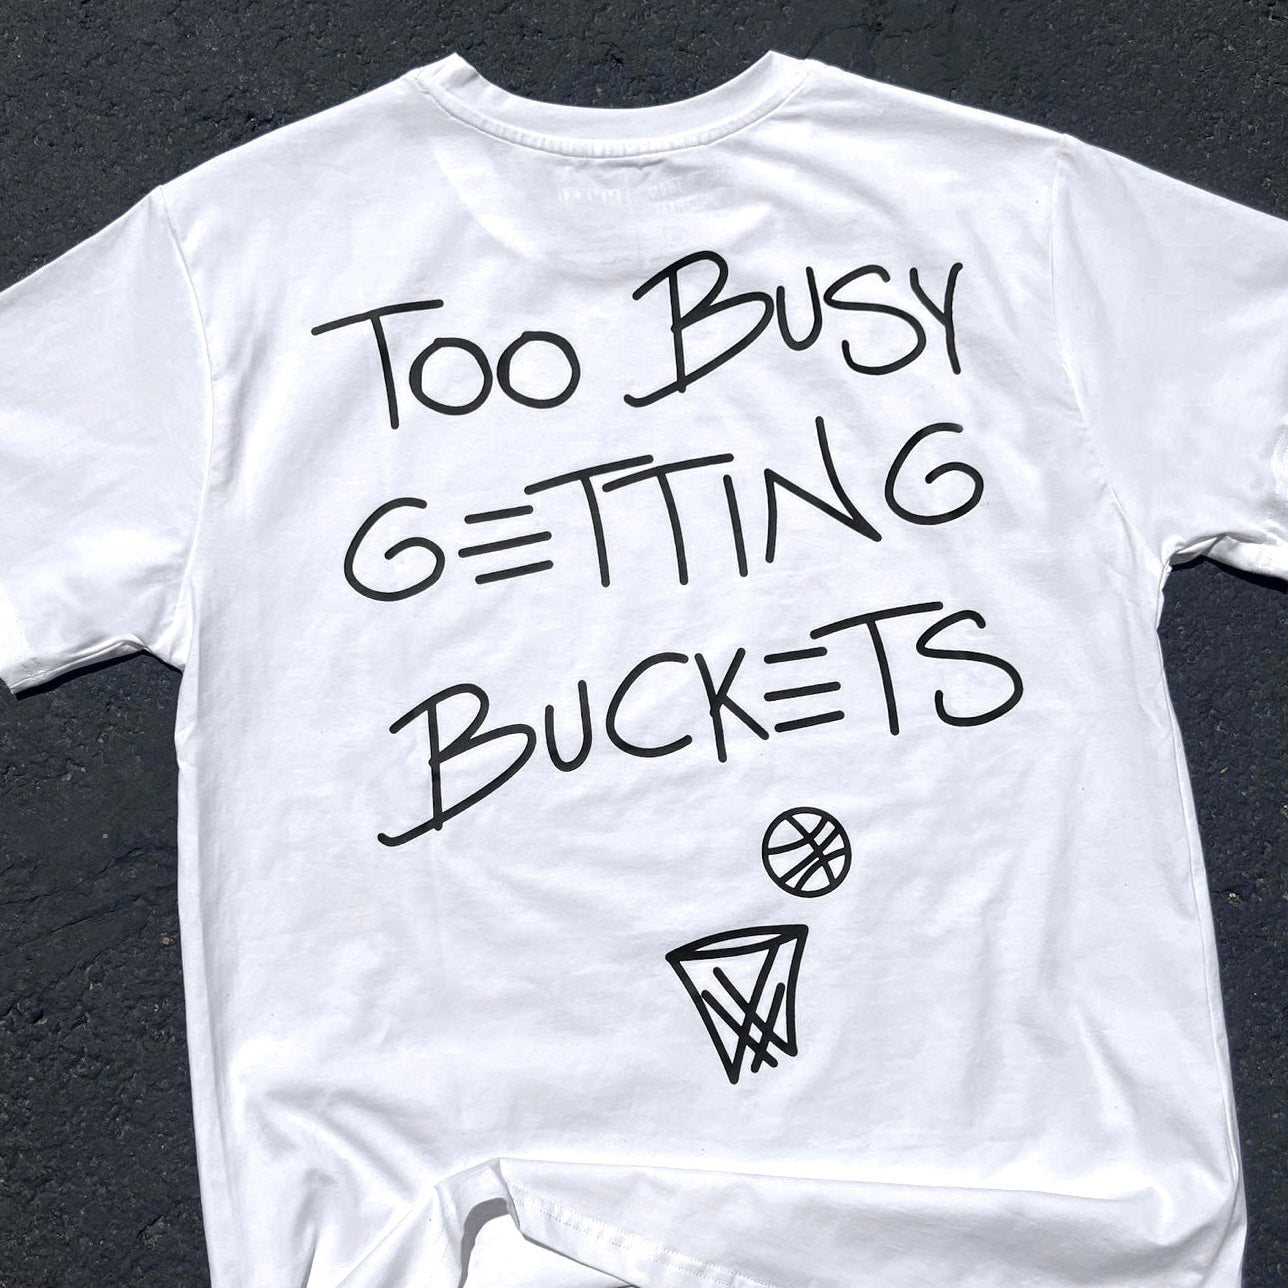 Too Busy Getting Buckets T-Shirt - Youth - White